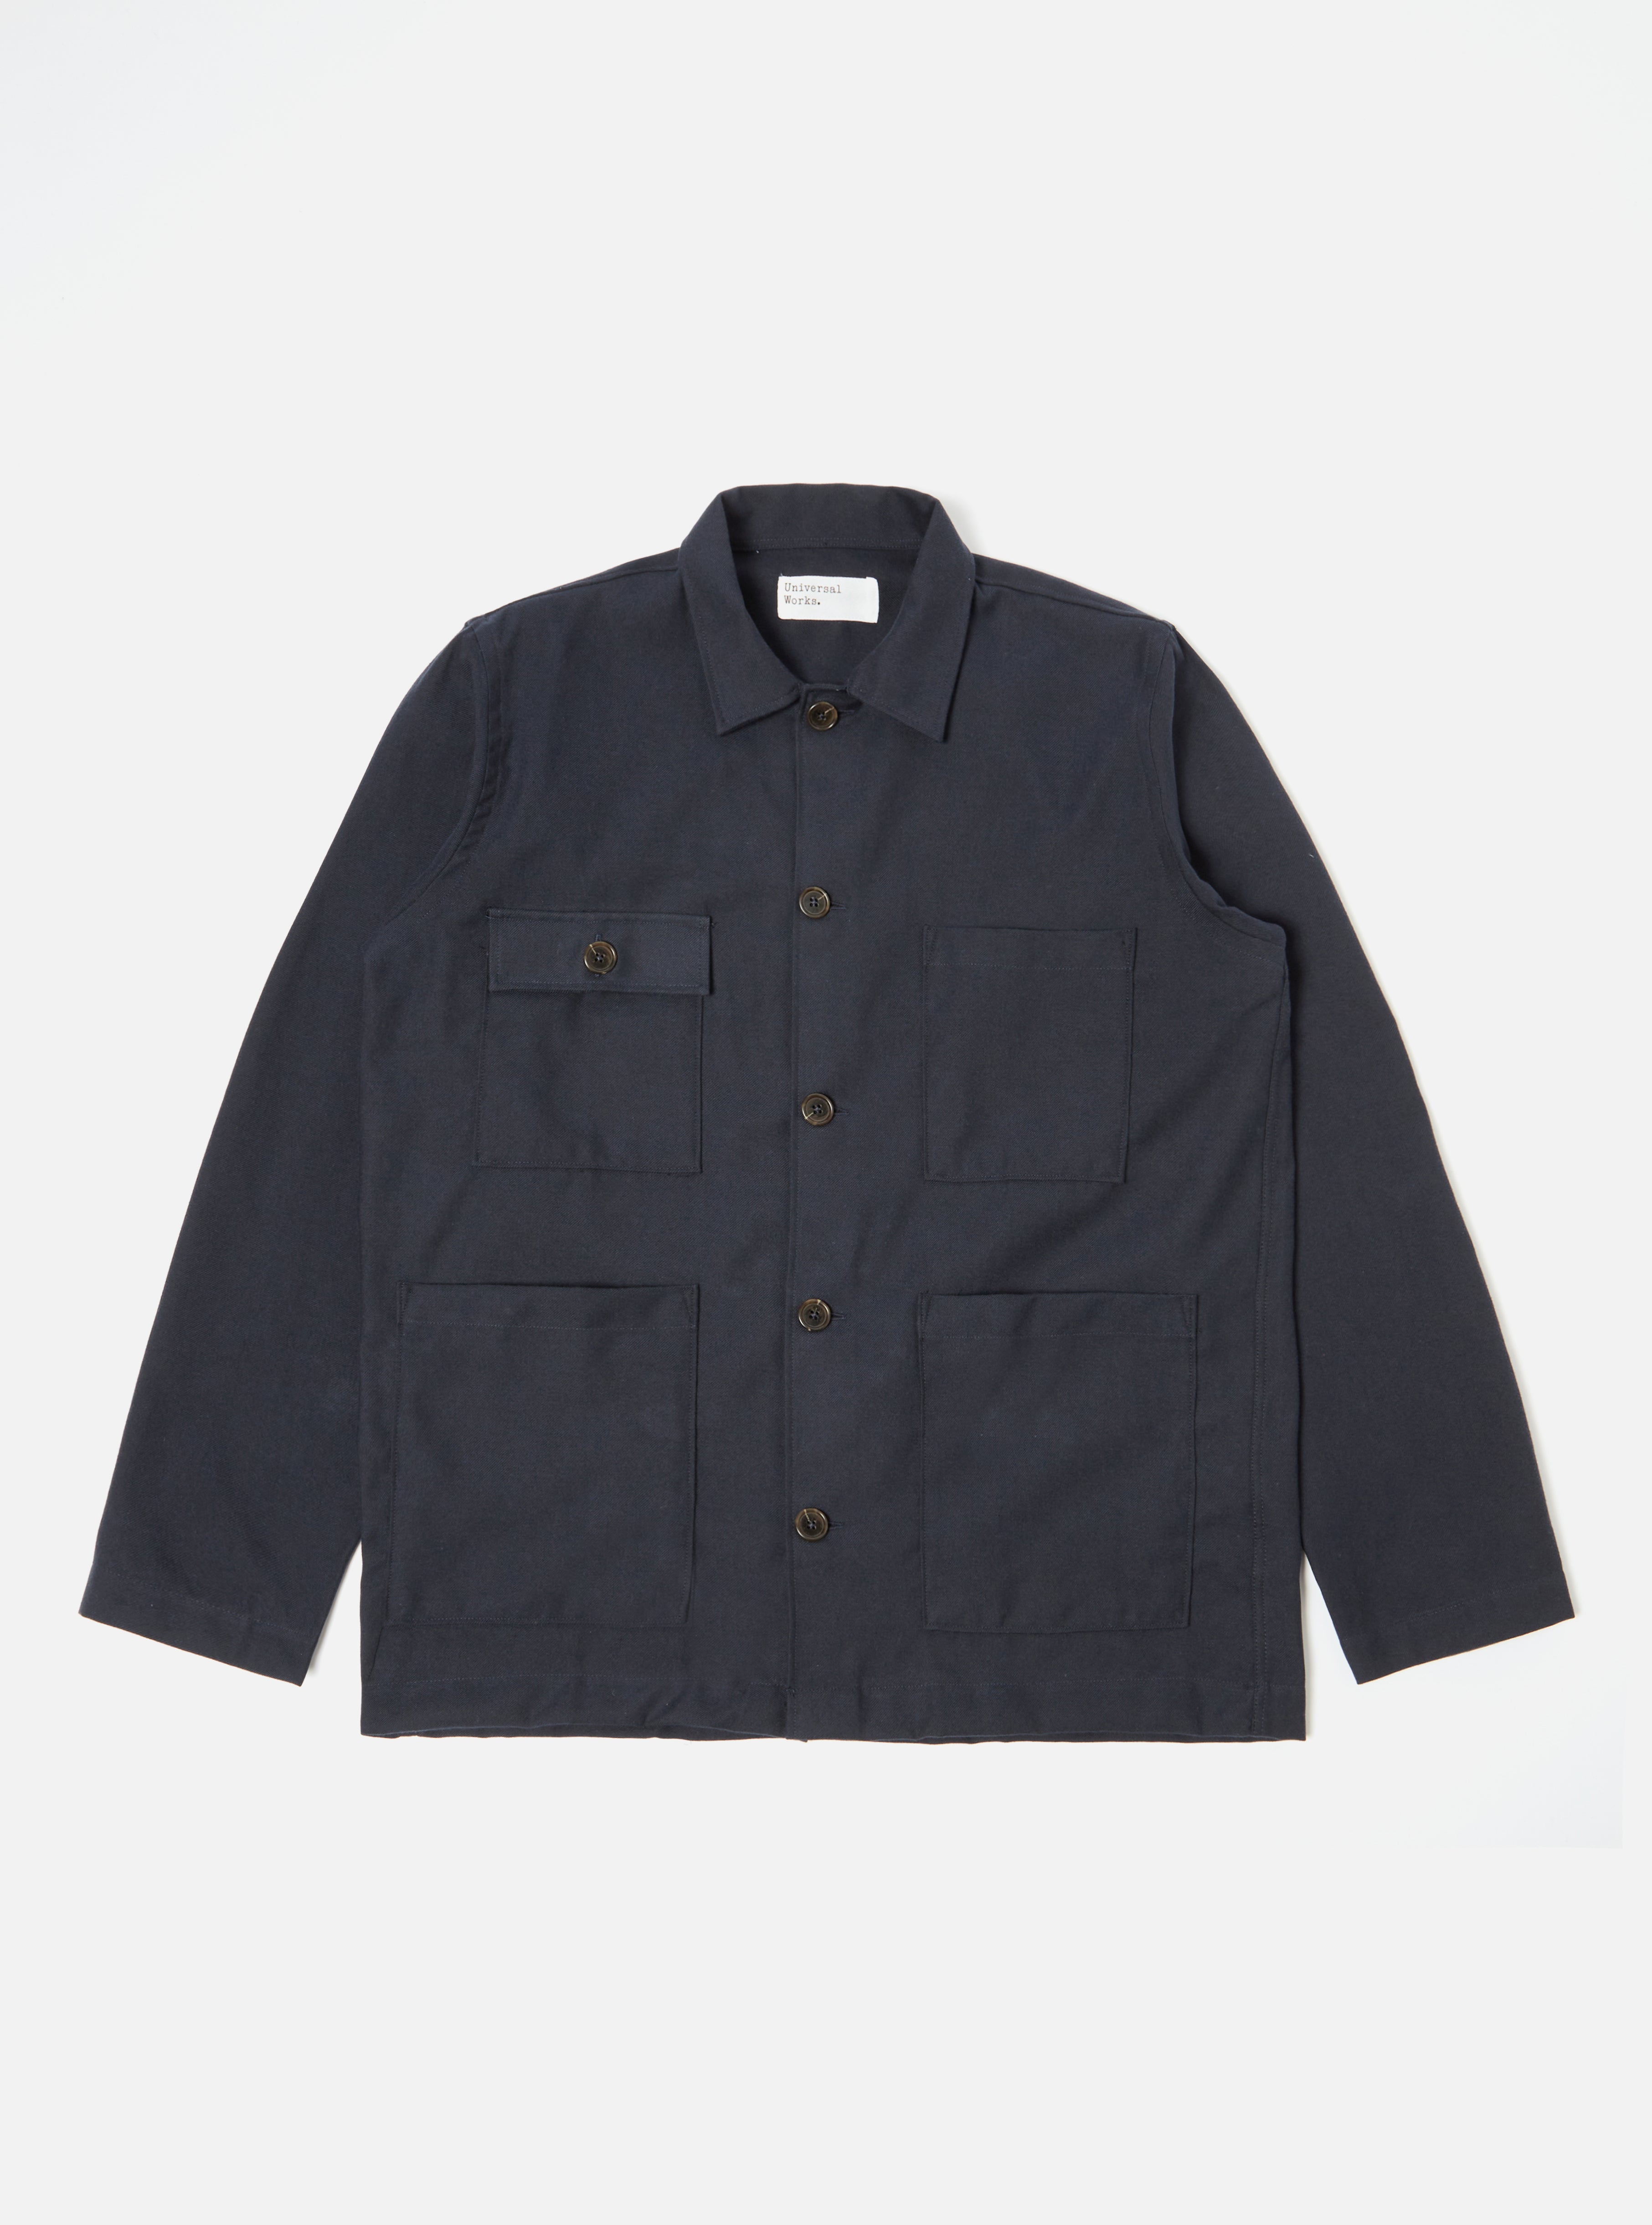 Universal Works Dockside Overshirt in Navy Cotton/Wool Twill